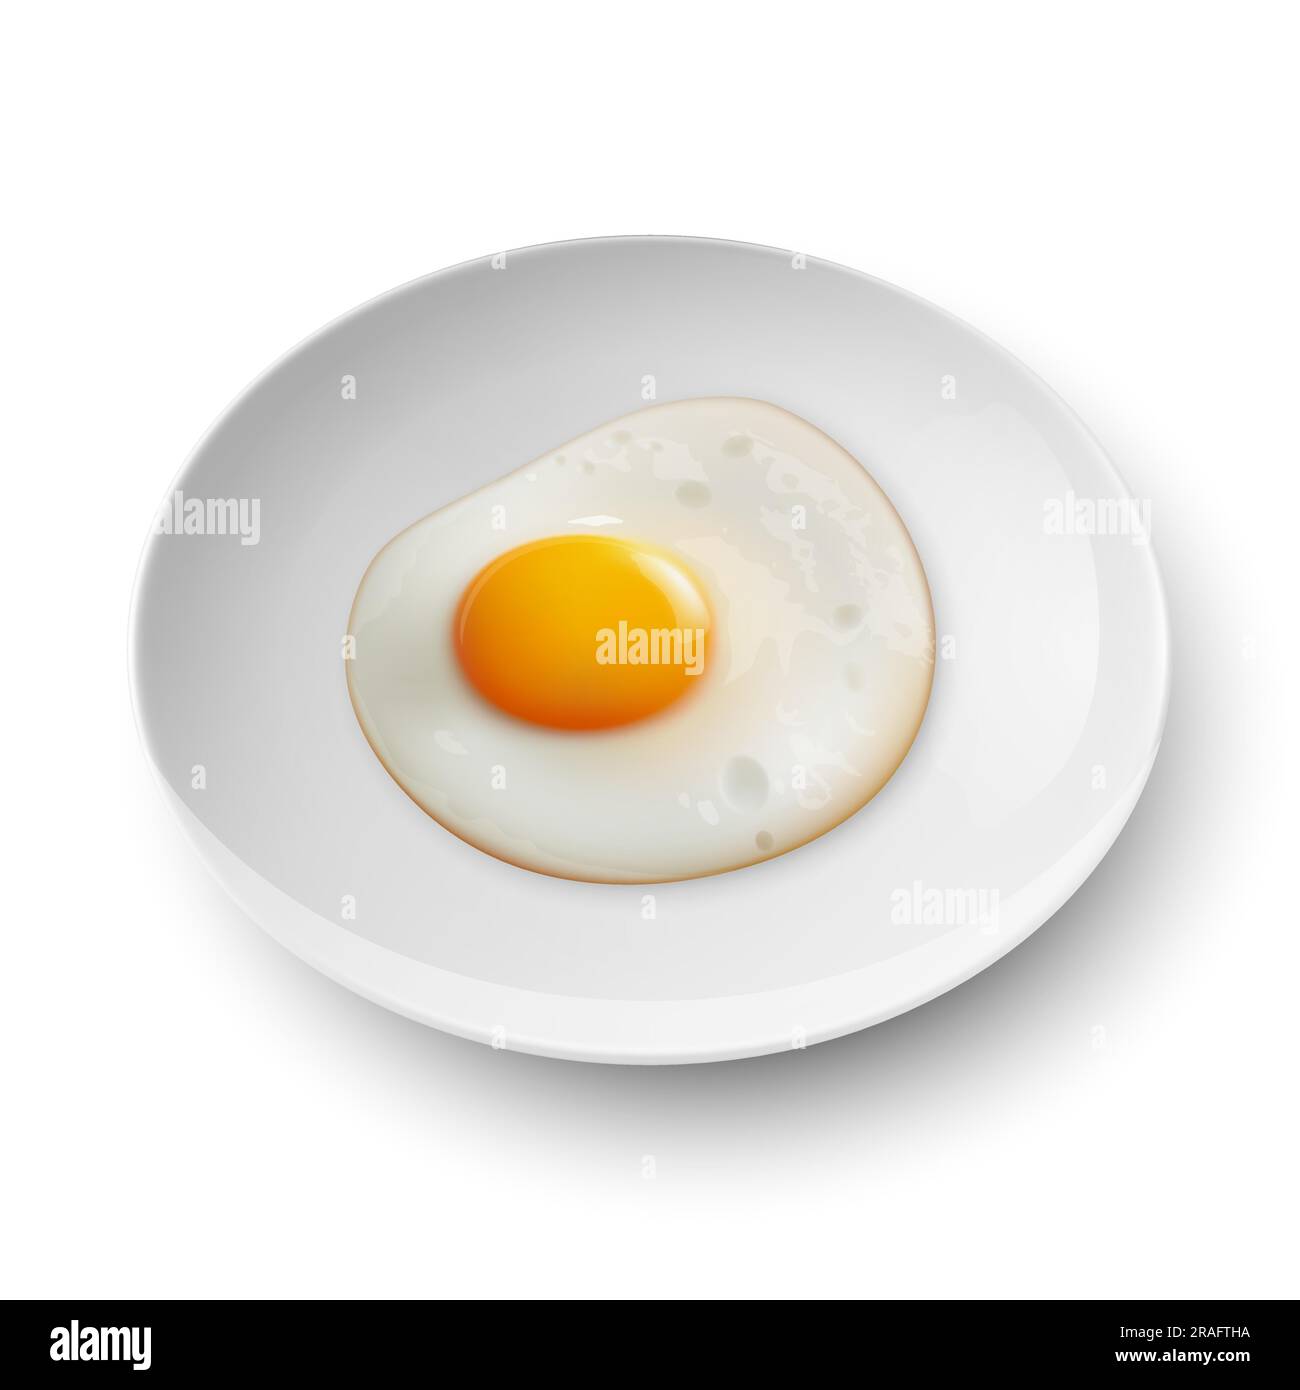 https://c8.alamy.com/comp/2RAFTHA/vector-3d-realistic-white-plate-dish-with-fried-egg-omelet-inside-isolated-on-white-background-healthy-breakfast-protein-food-diet-meal-concept-2RAFTHA.jpg